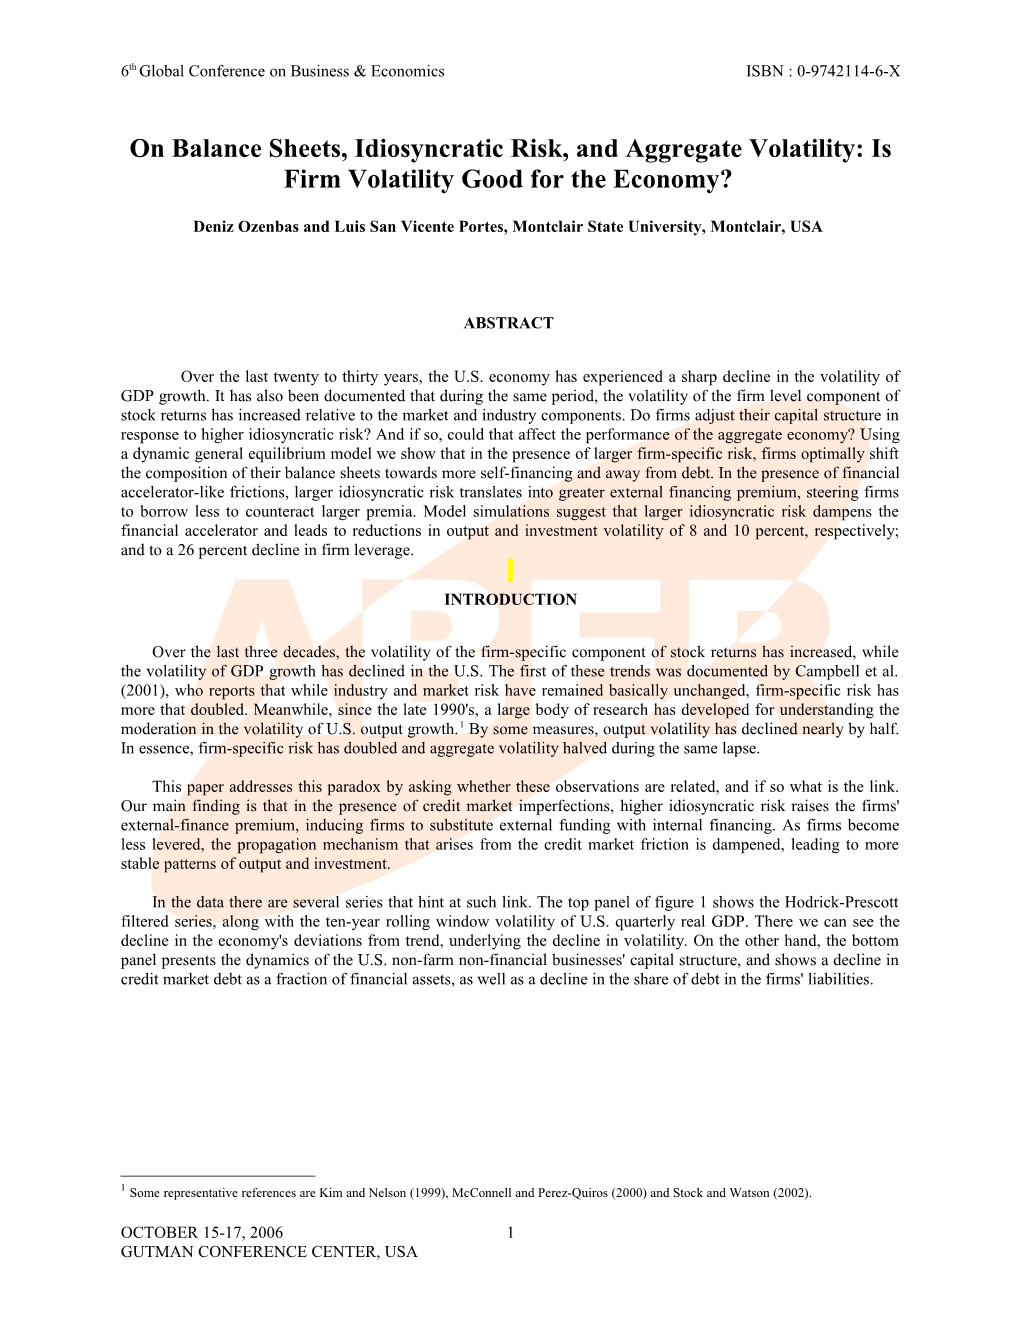 On Balance Sheets, Idiosyncratic Risk, and Aggregate Volatility: Is Firm Volatility Good